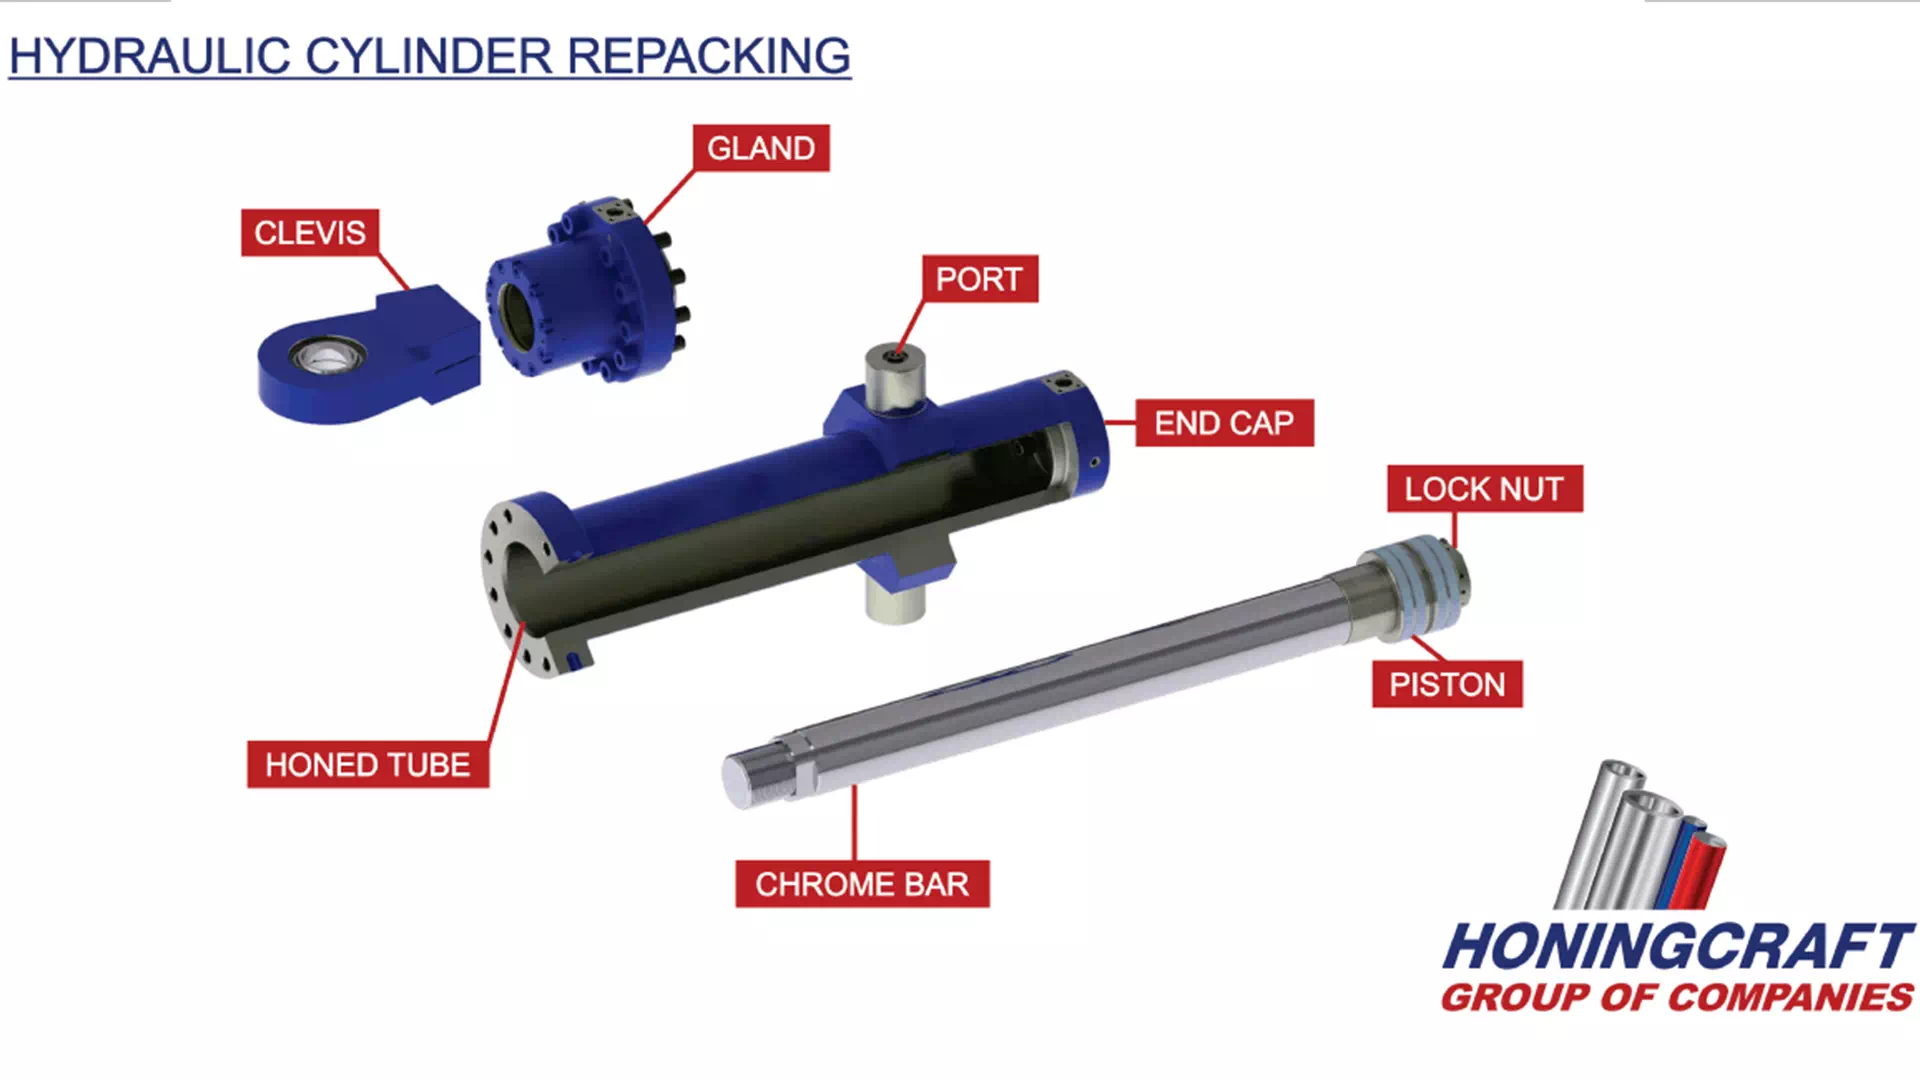 Hydraulic Cylinder Repacking Everything You Need To Know